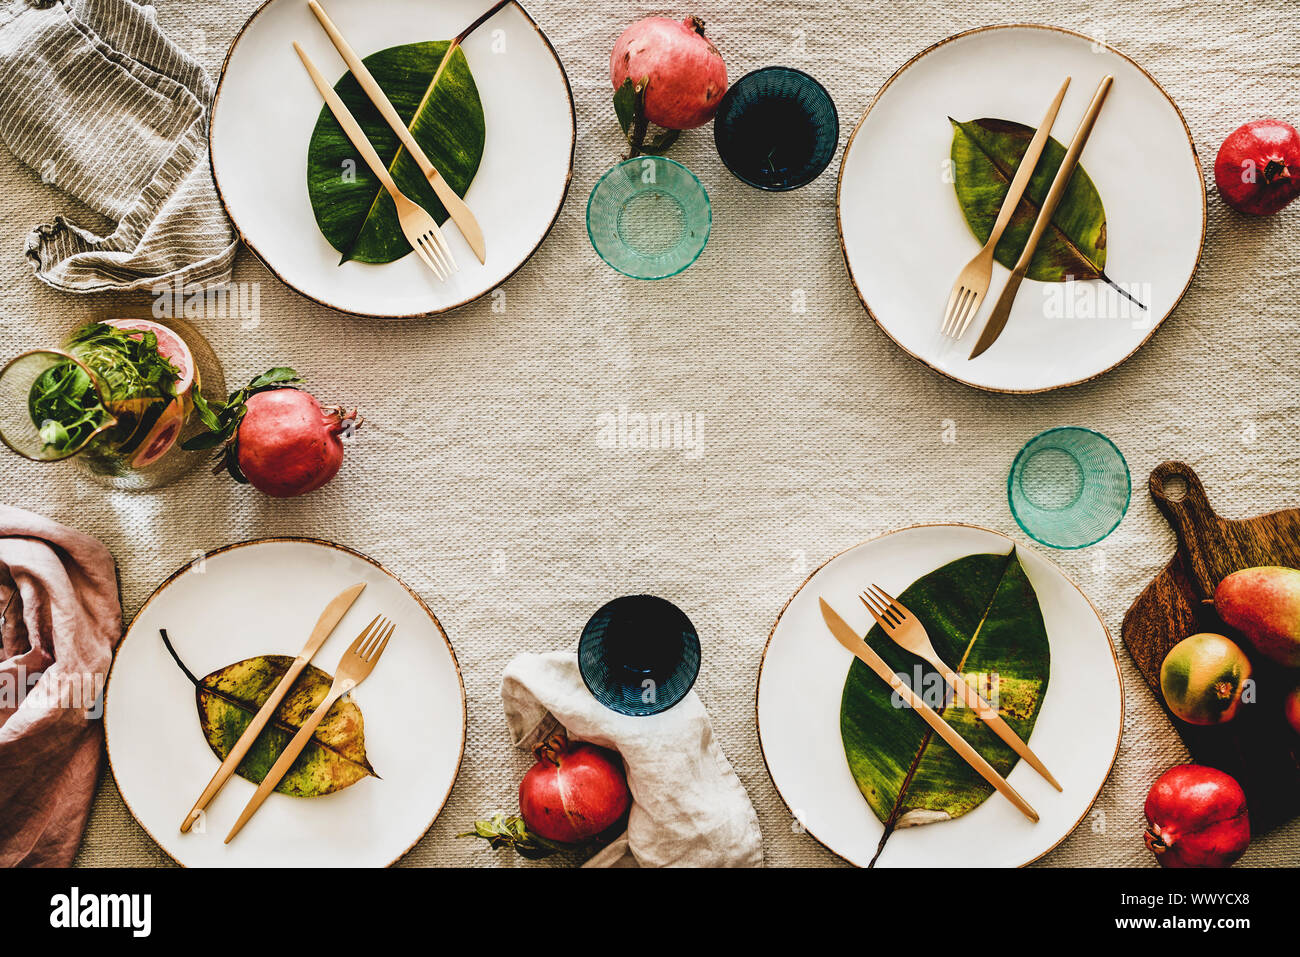 Autumn table styling or setting for holiday celebration, copy space Stock Photo